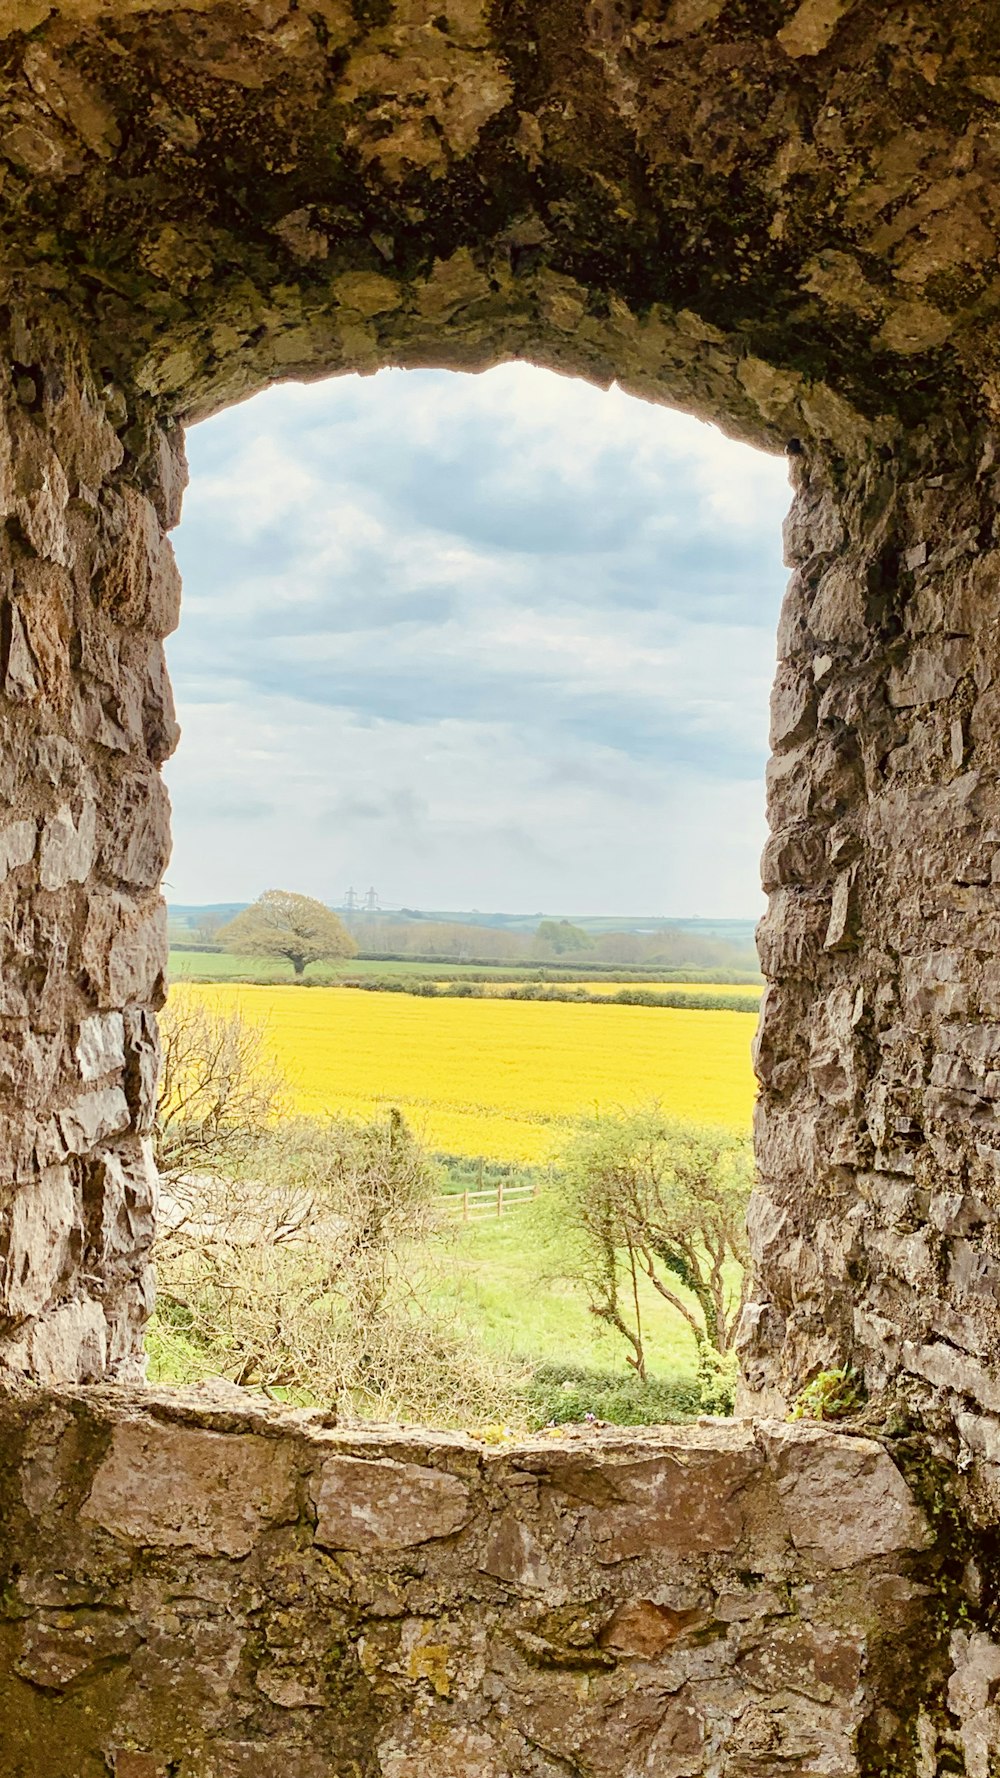 a window in a stone wall with a field in the background